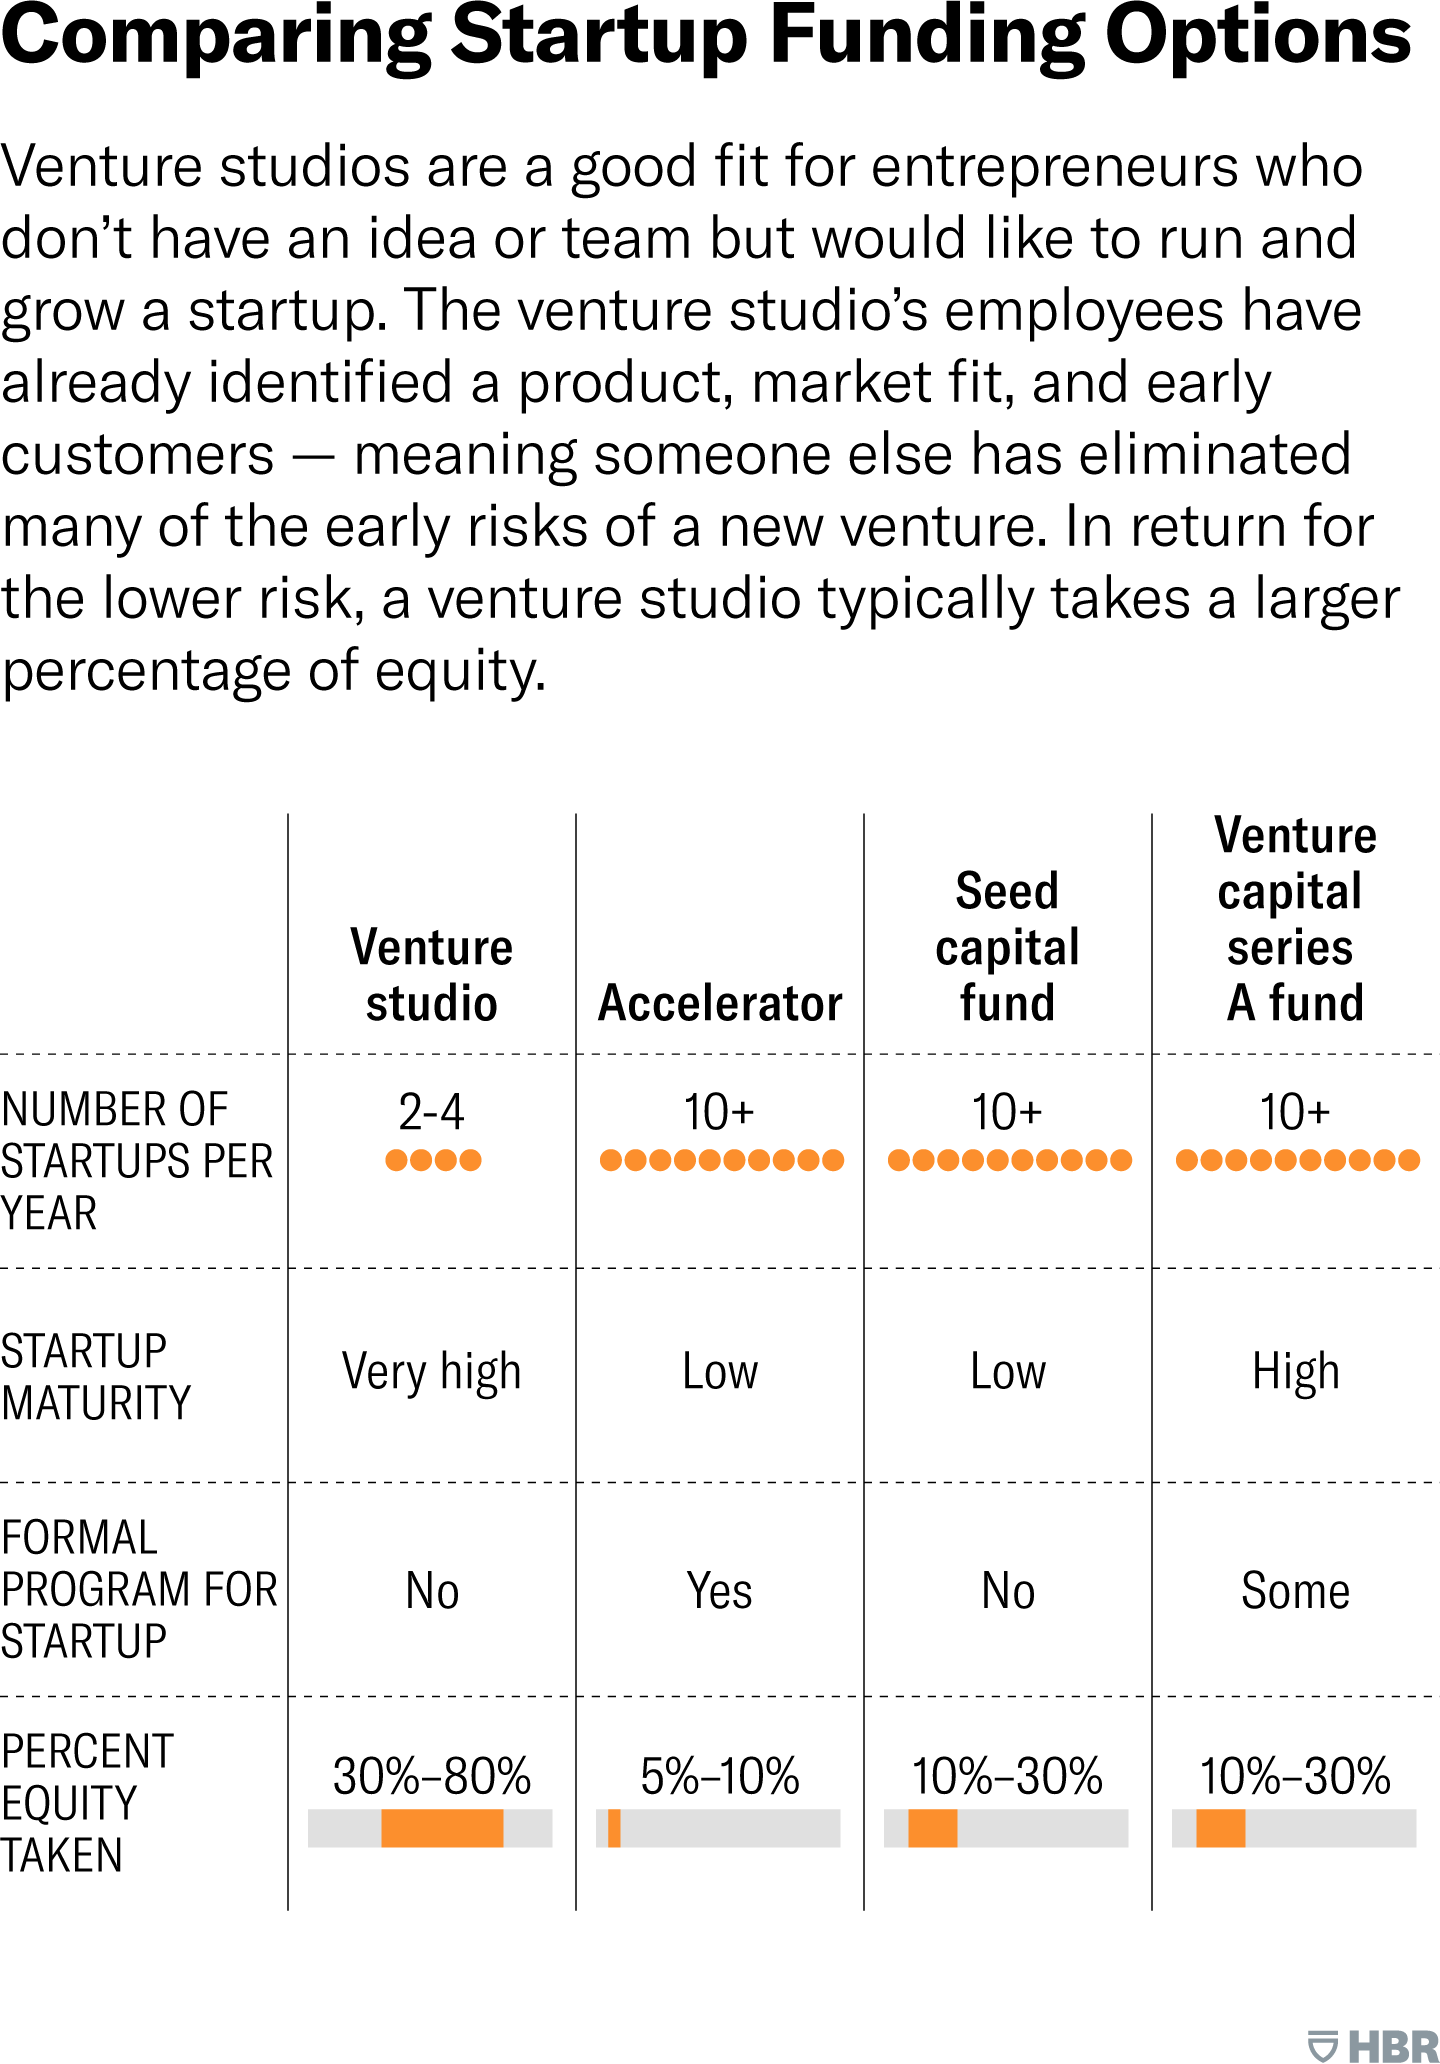 different startup funding options chart
